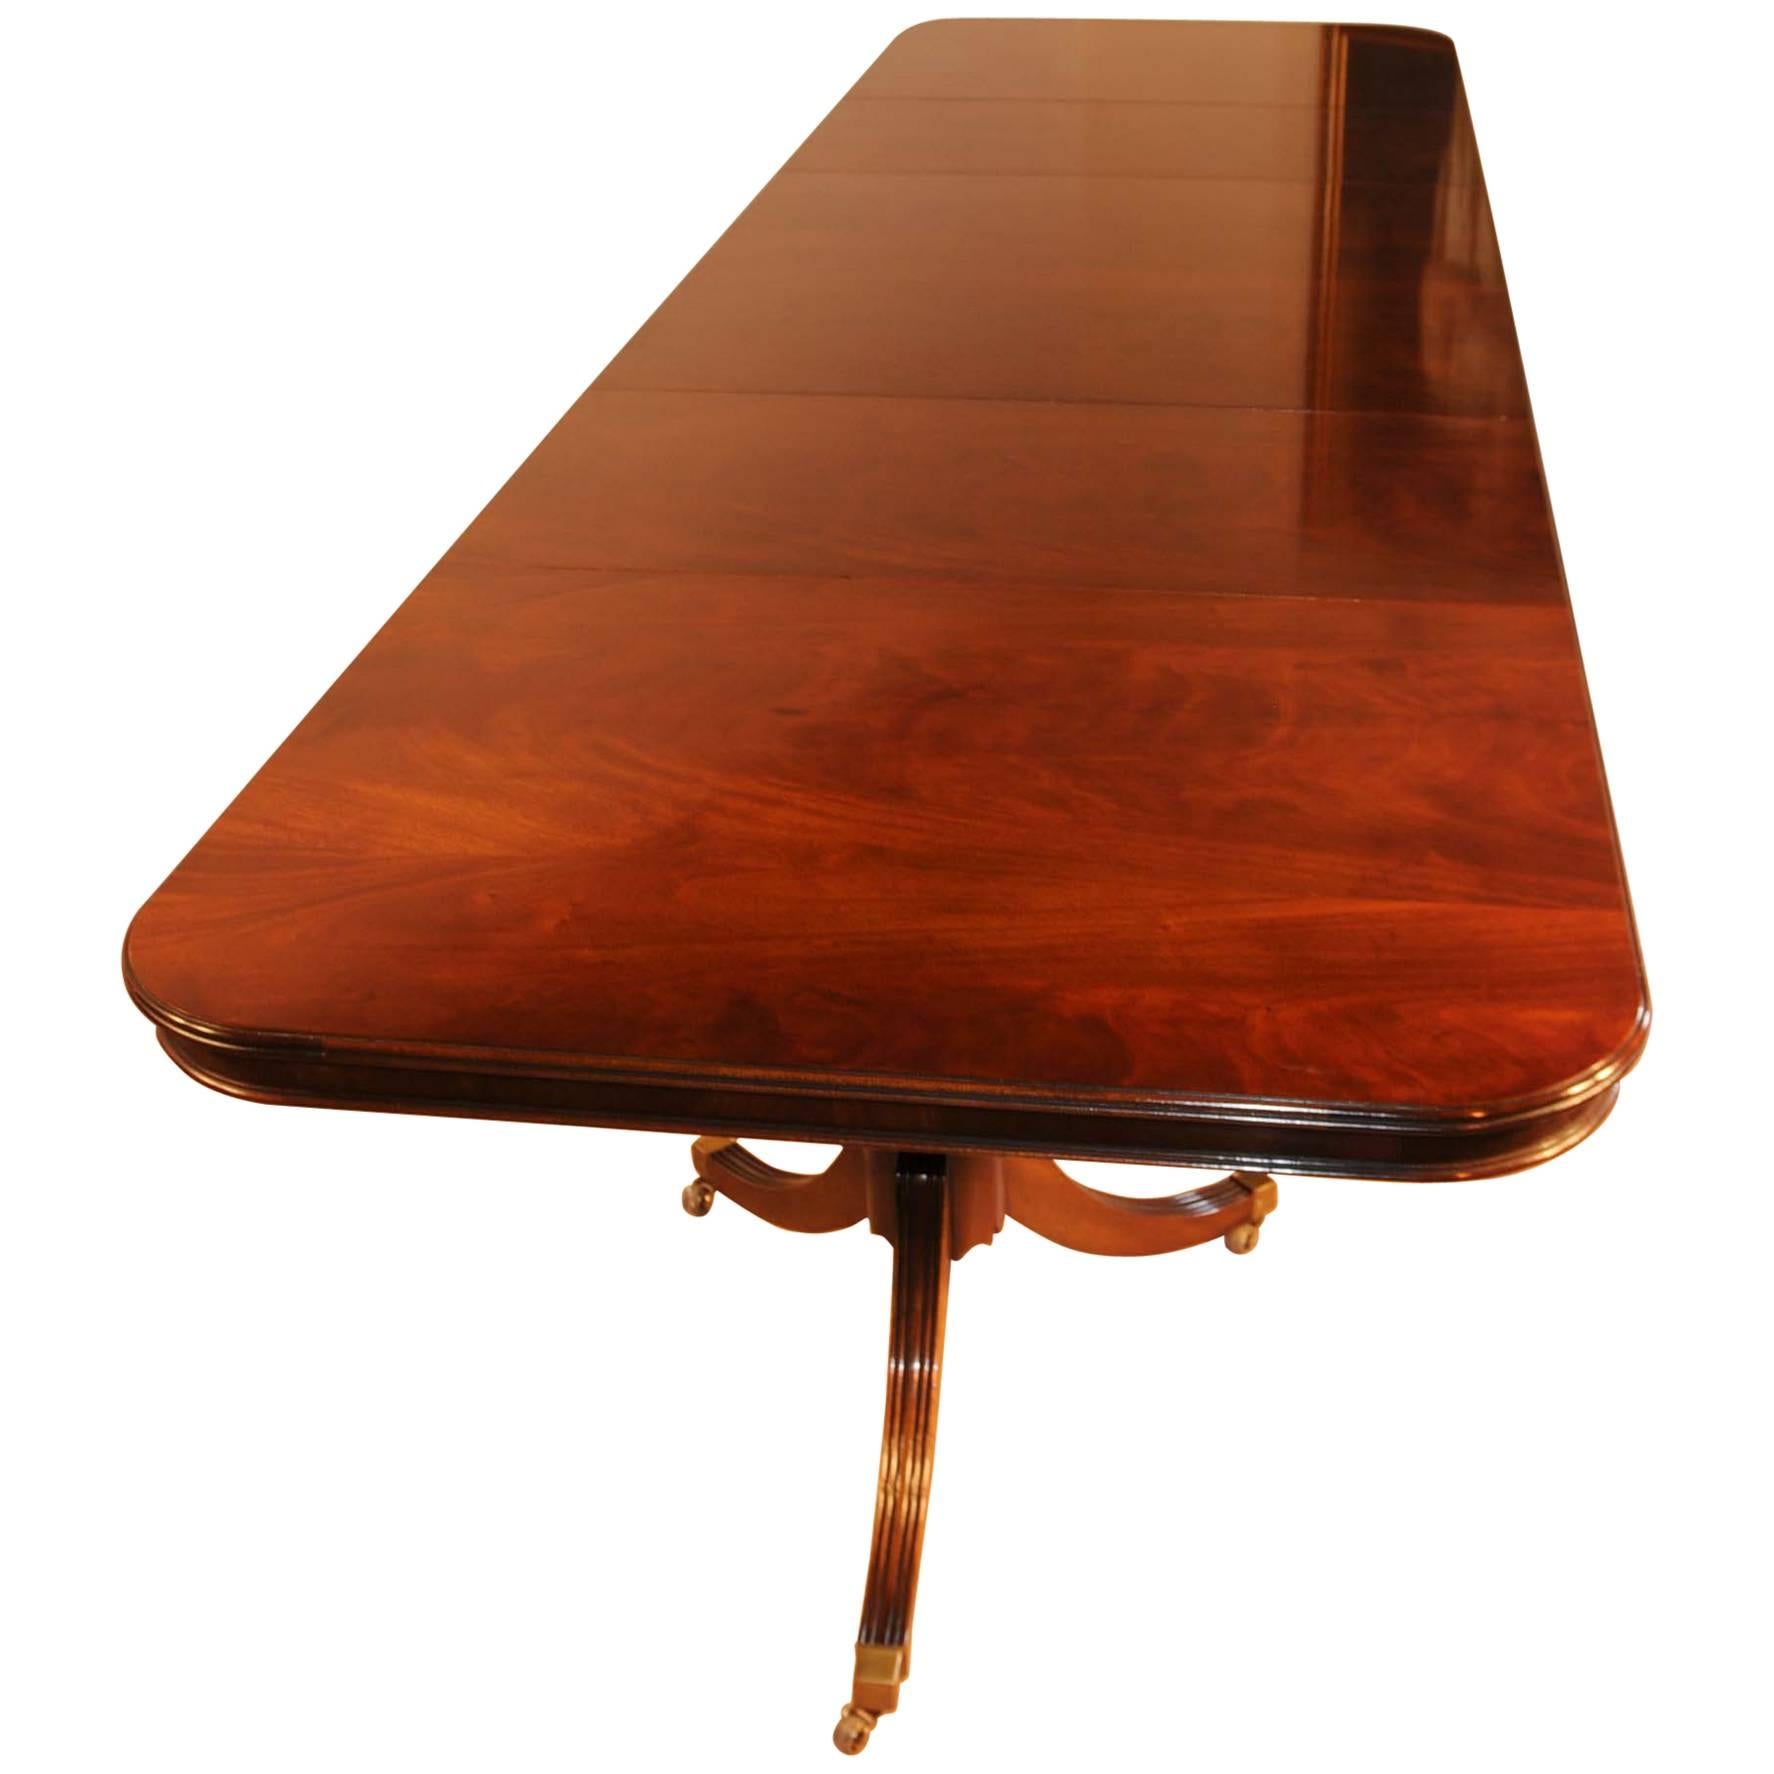 Mahogany Regency Style Pedestal Dining Table Diner Furniture, Extra Large For Sale